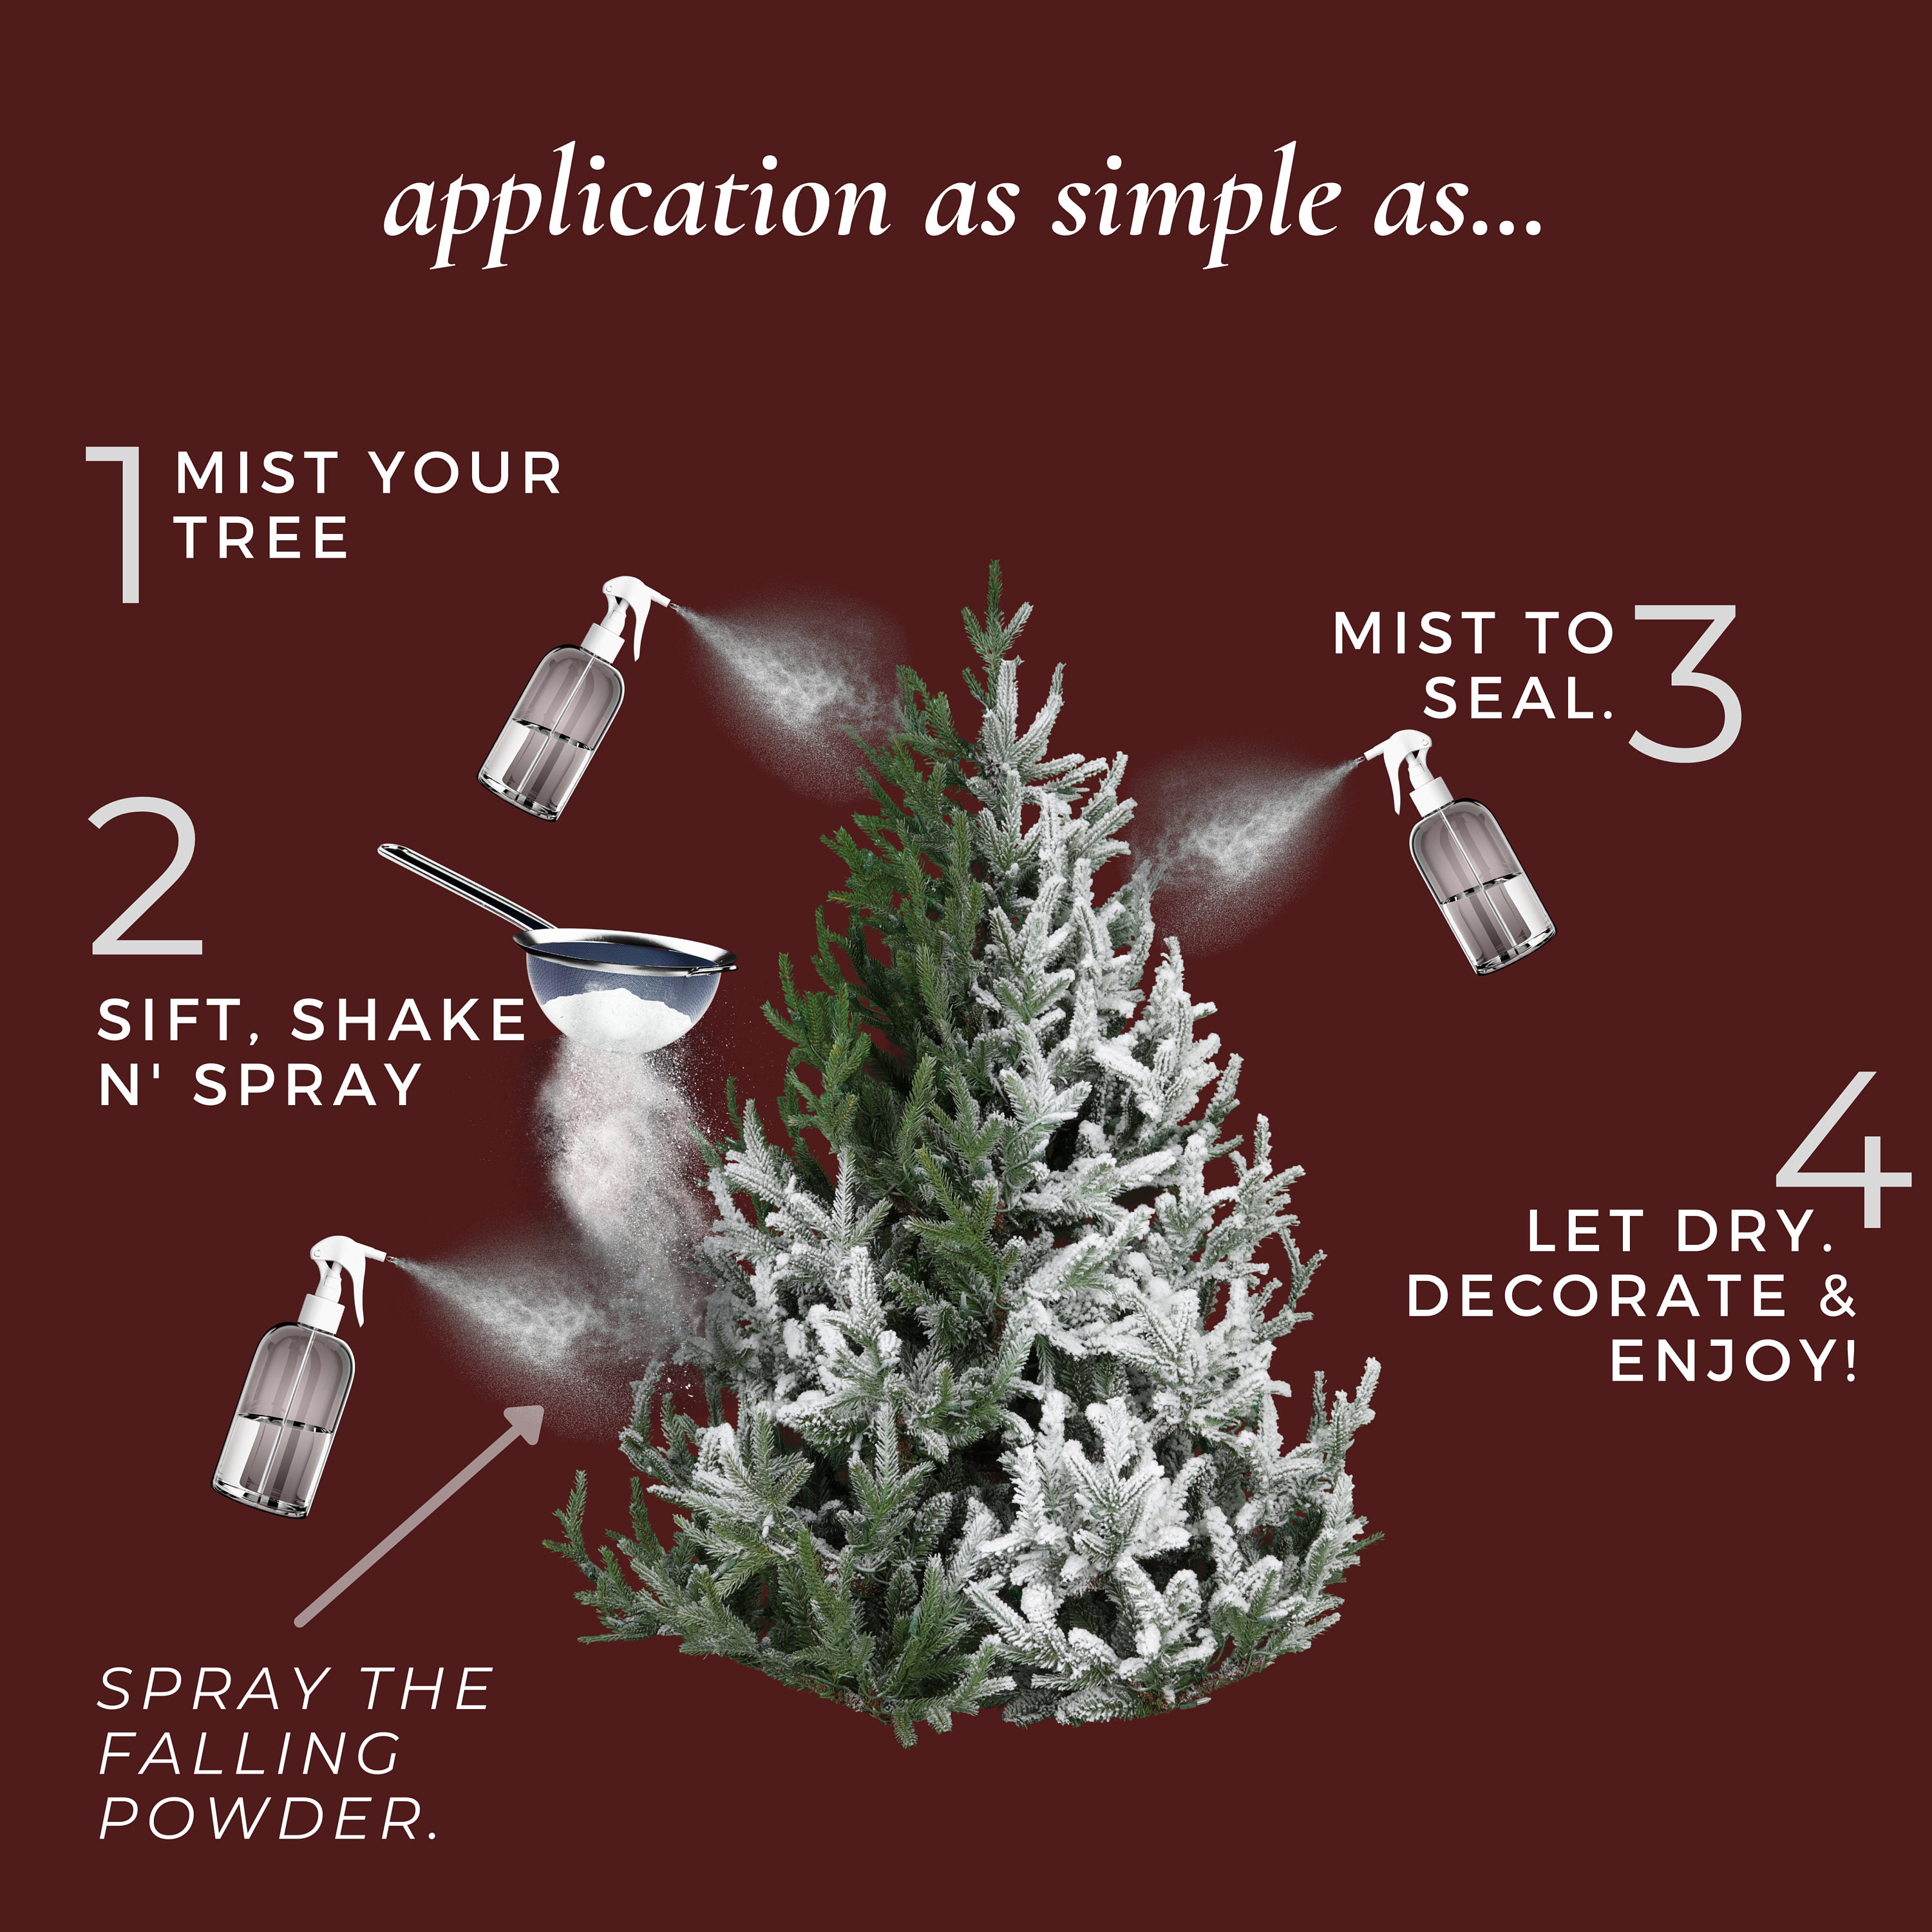 Re-flocking my Christmas trees with snow in a can! #christmasdecor #sn, snow spray